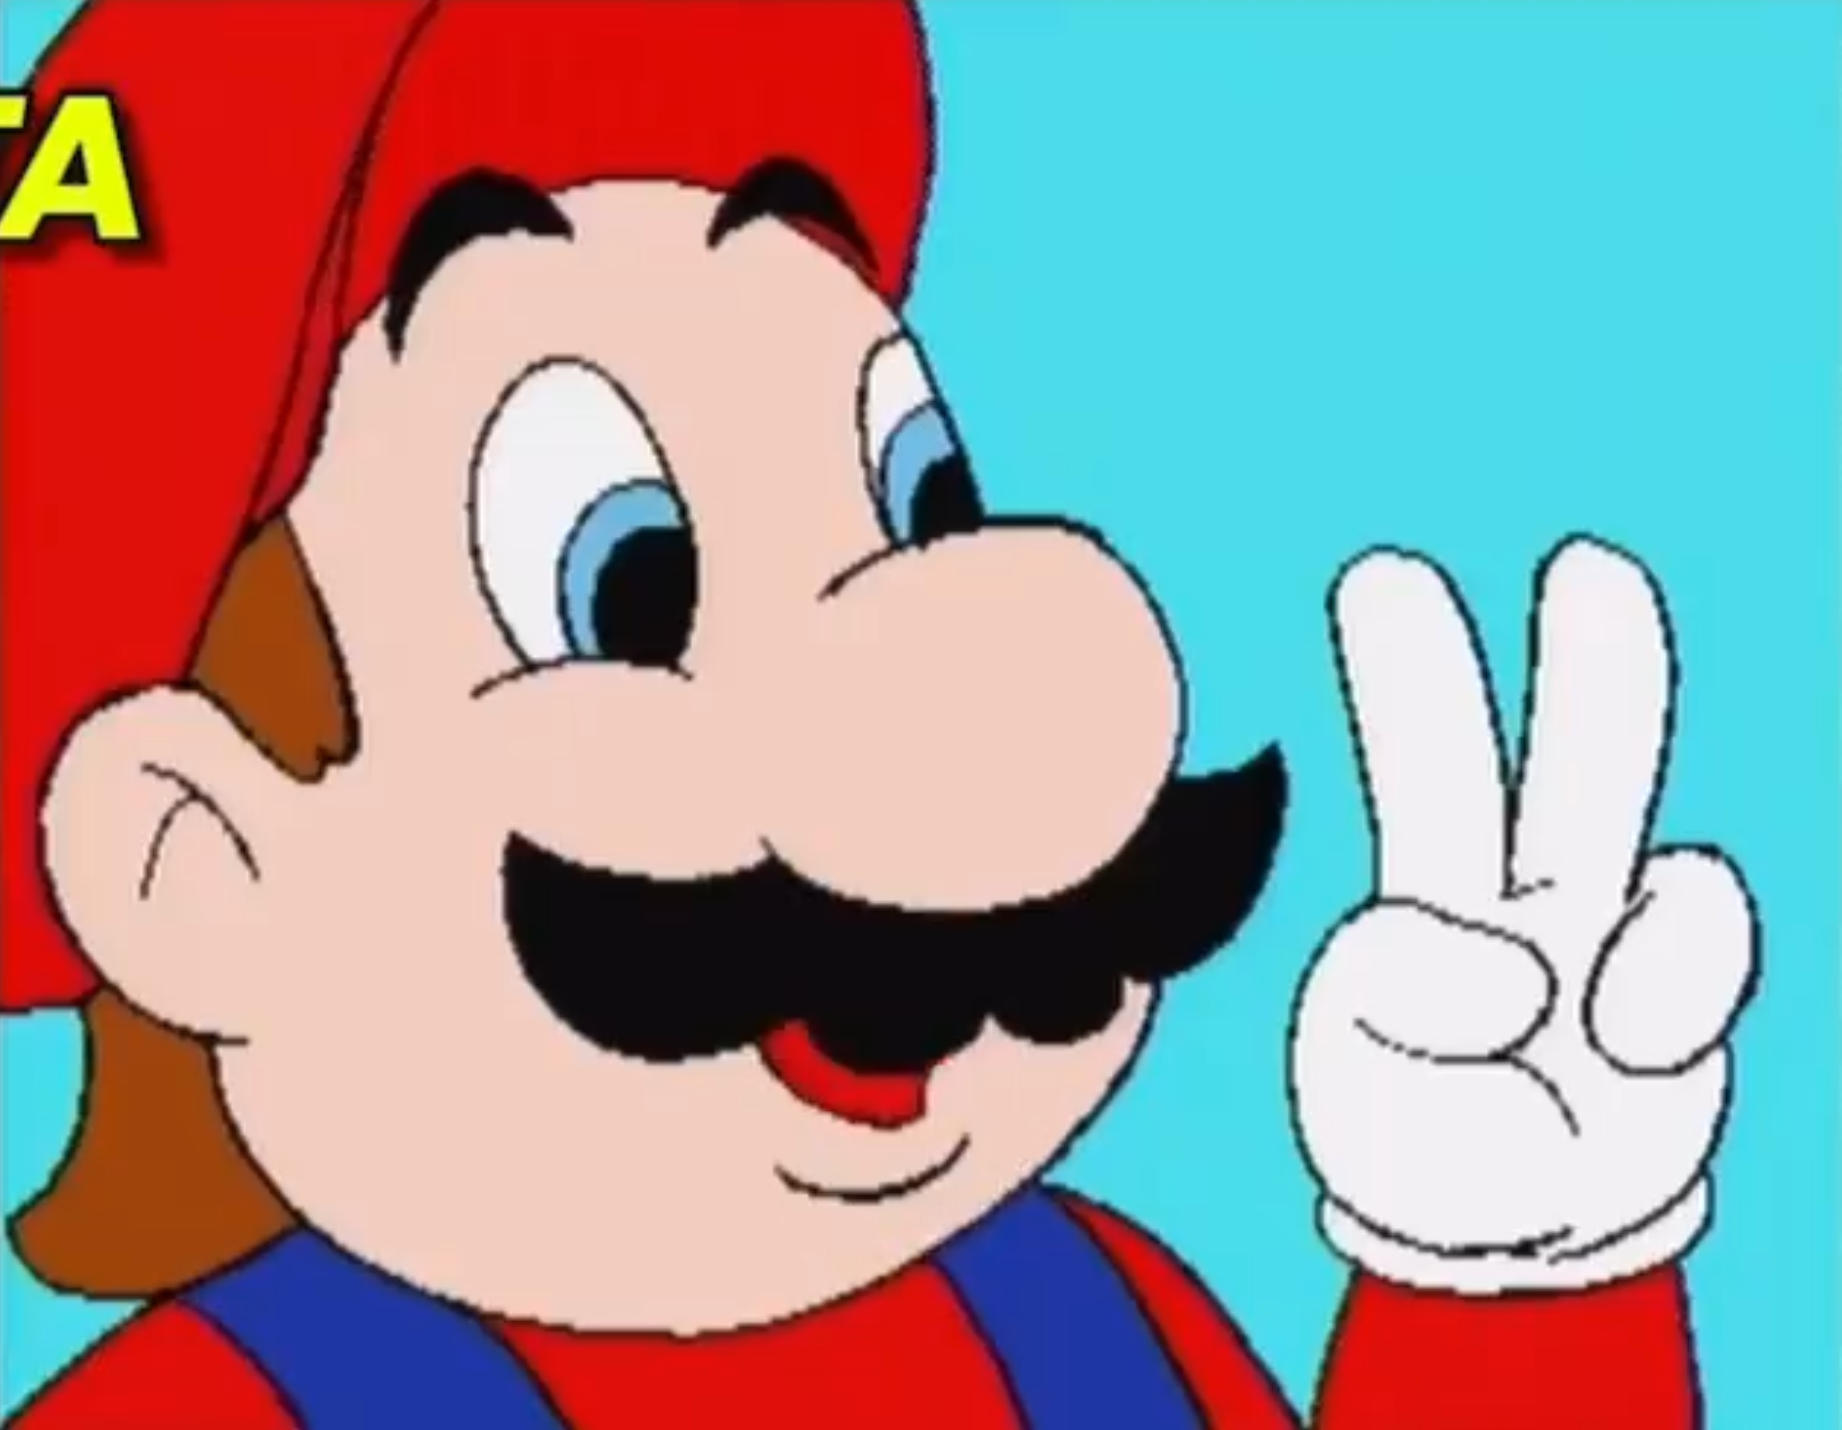 A picture of Mario from Hotel Mario raising two fingers instead of just one